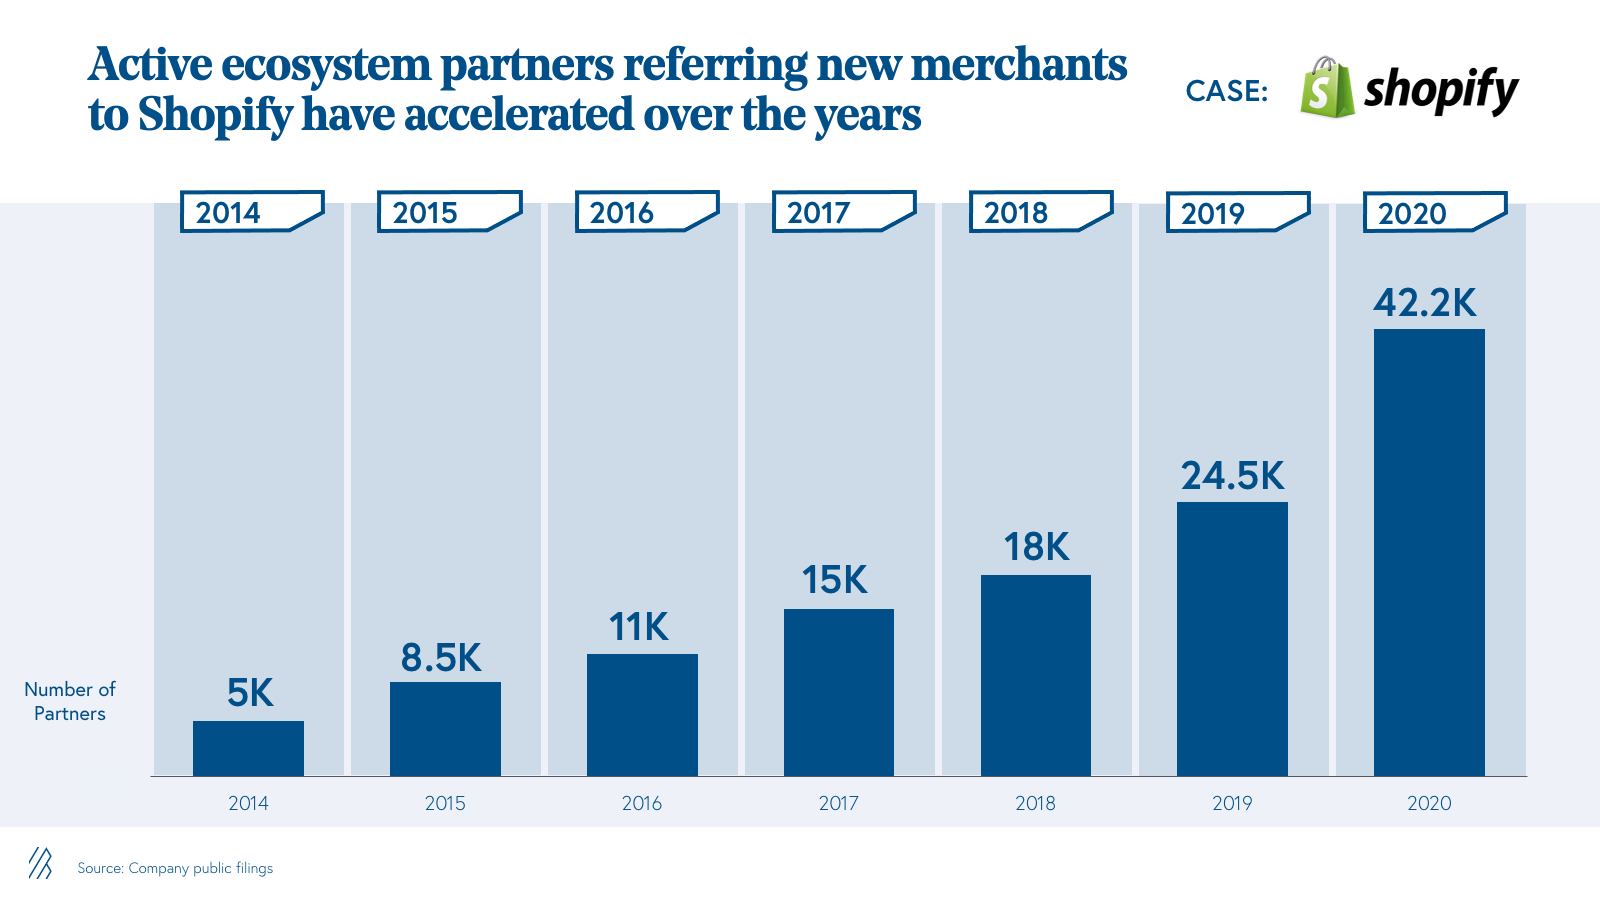 Active ecosystem partners referring new merchants to Shopify have accelerated over the years